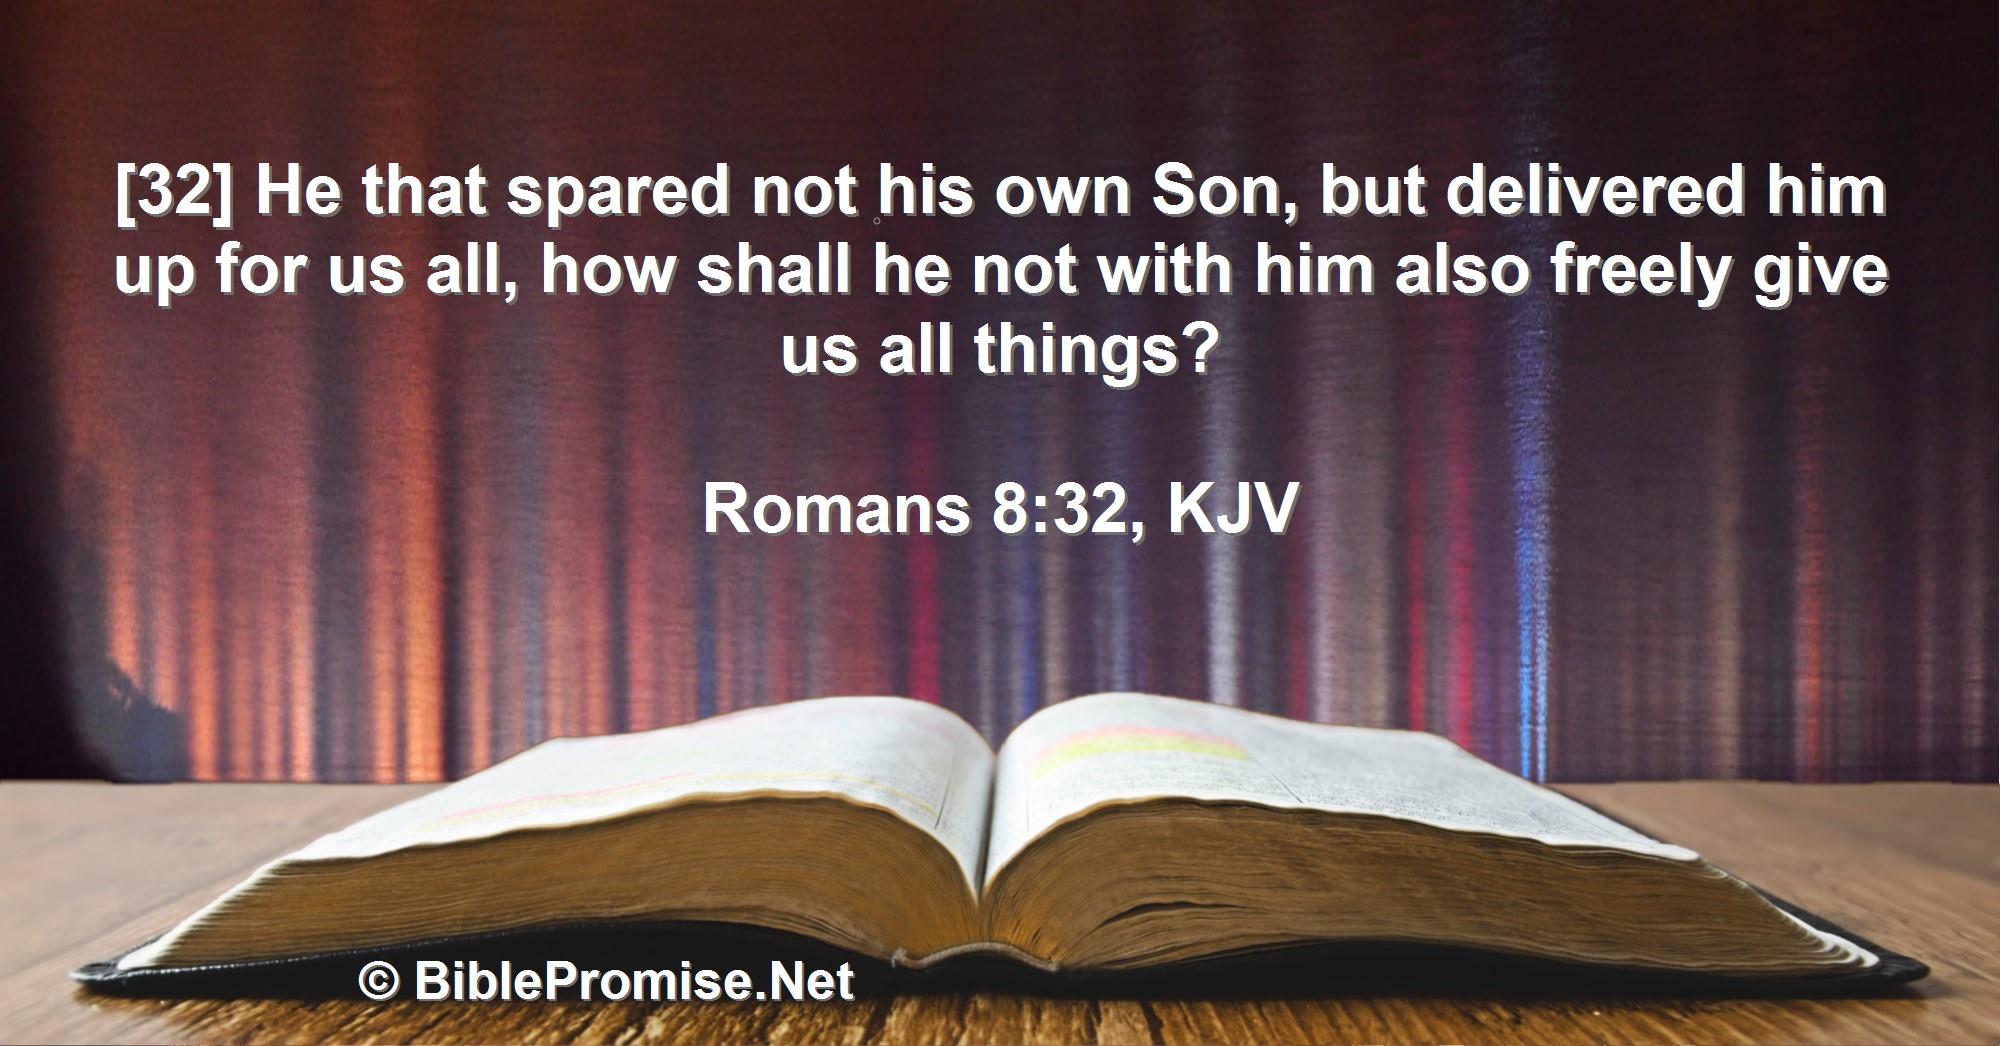 Tuesday, November 23, 2021 - Romans 8:32 (KJV) - Bible promise that God will give us all things.